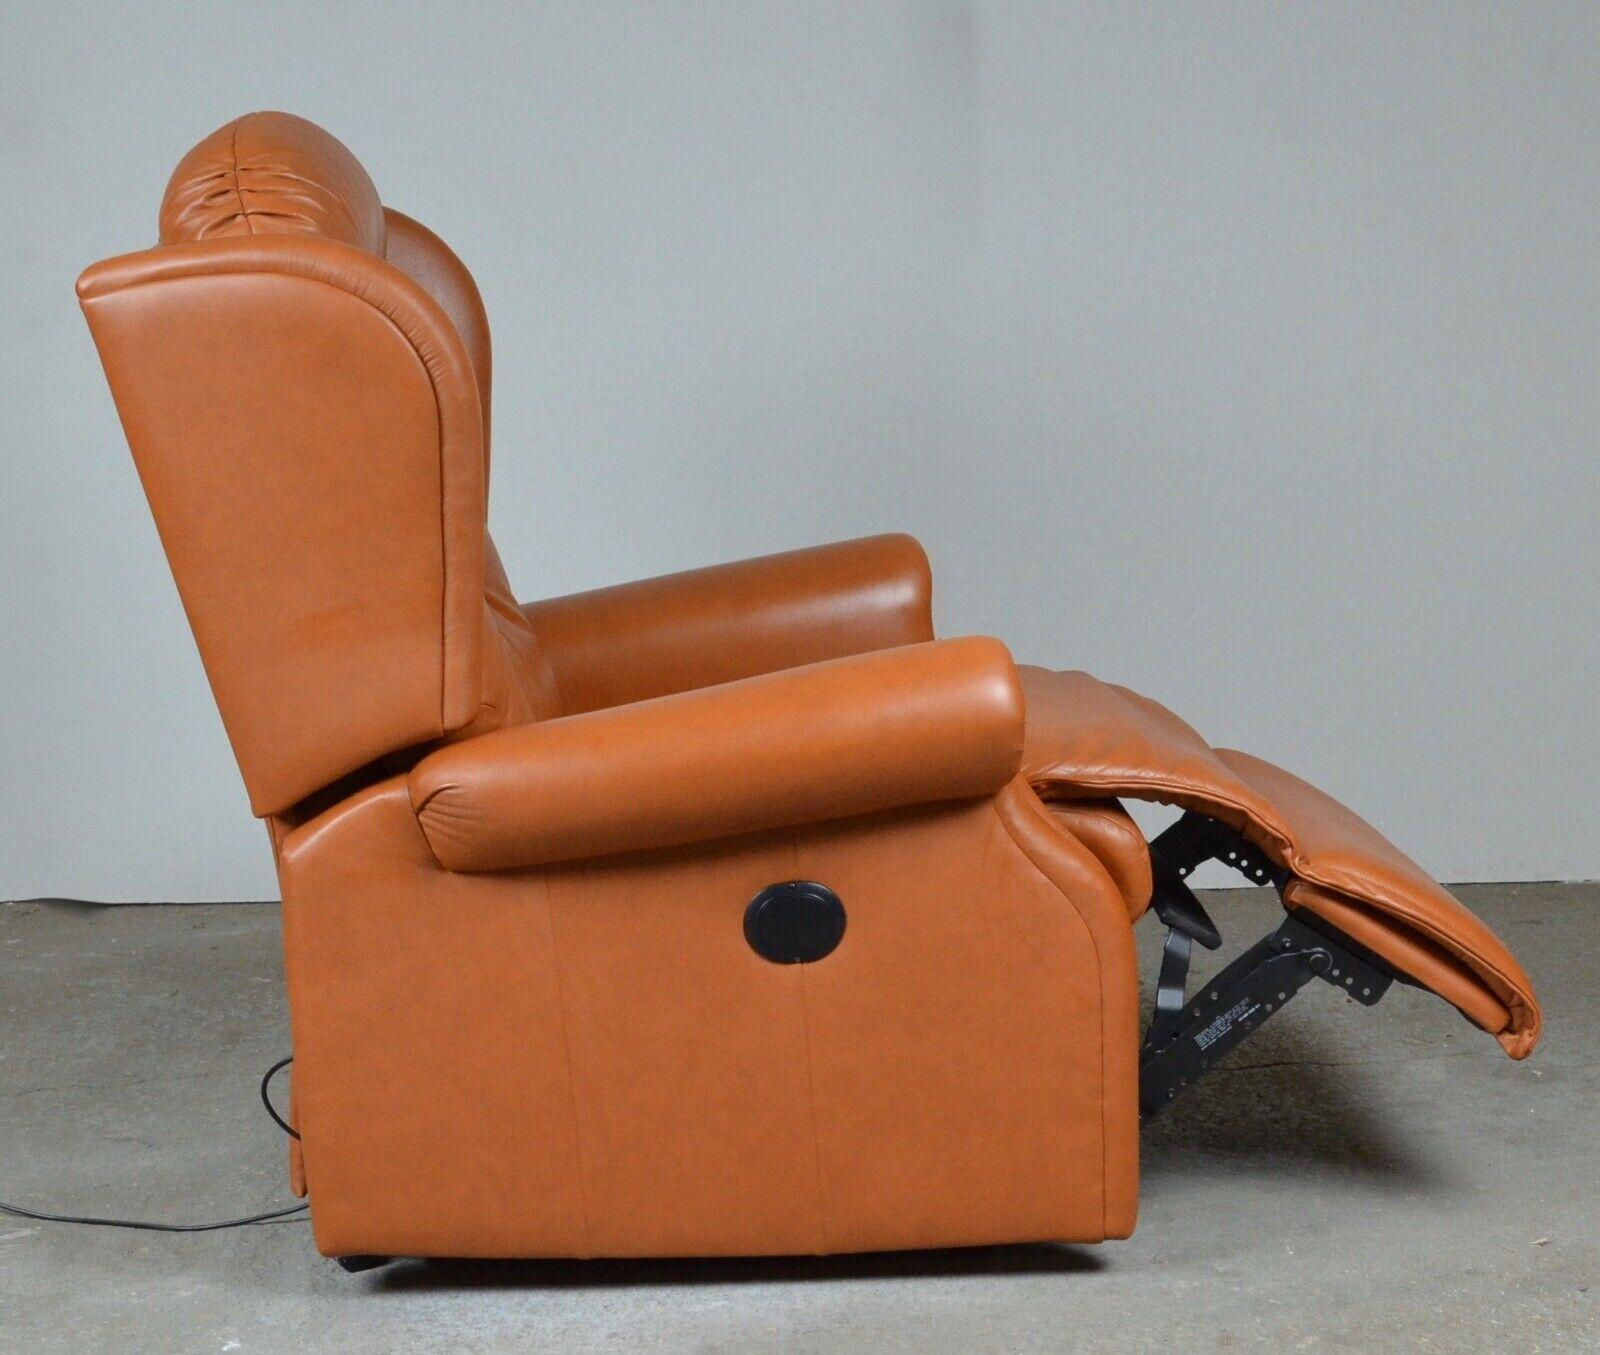 Other 1 of 2 Tan Leather Electric Recliner Armchairs